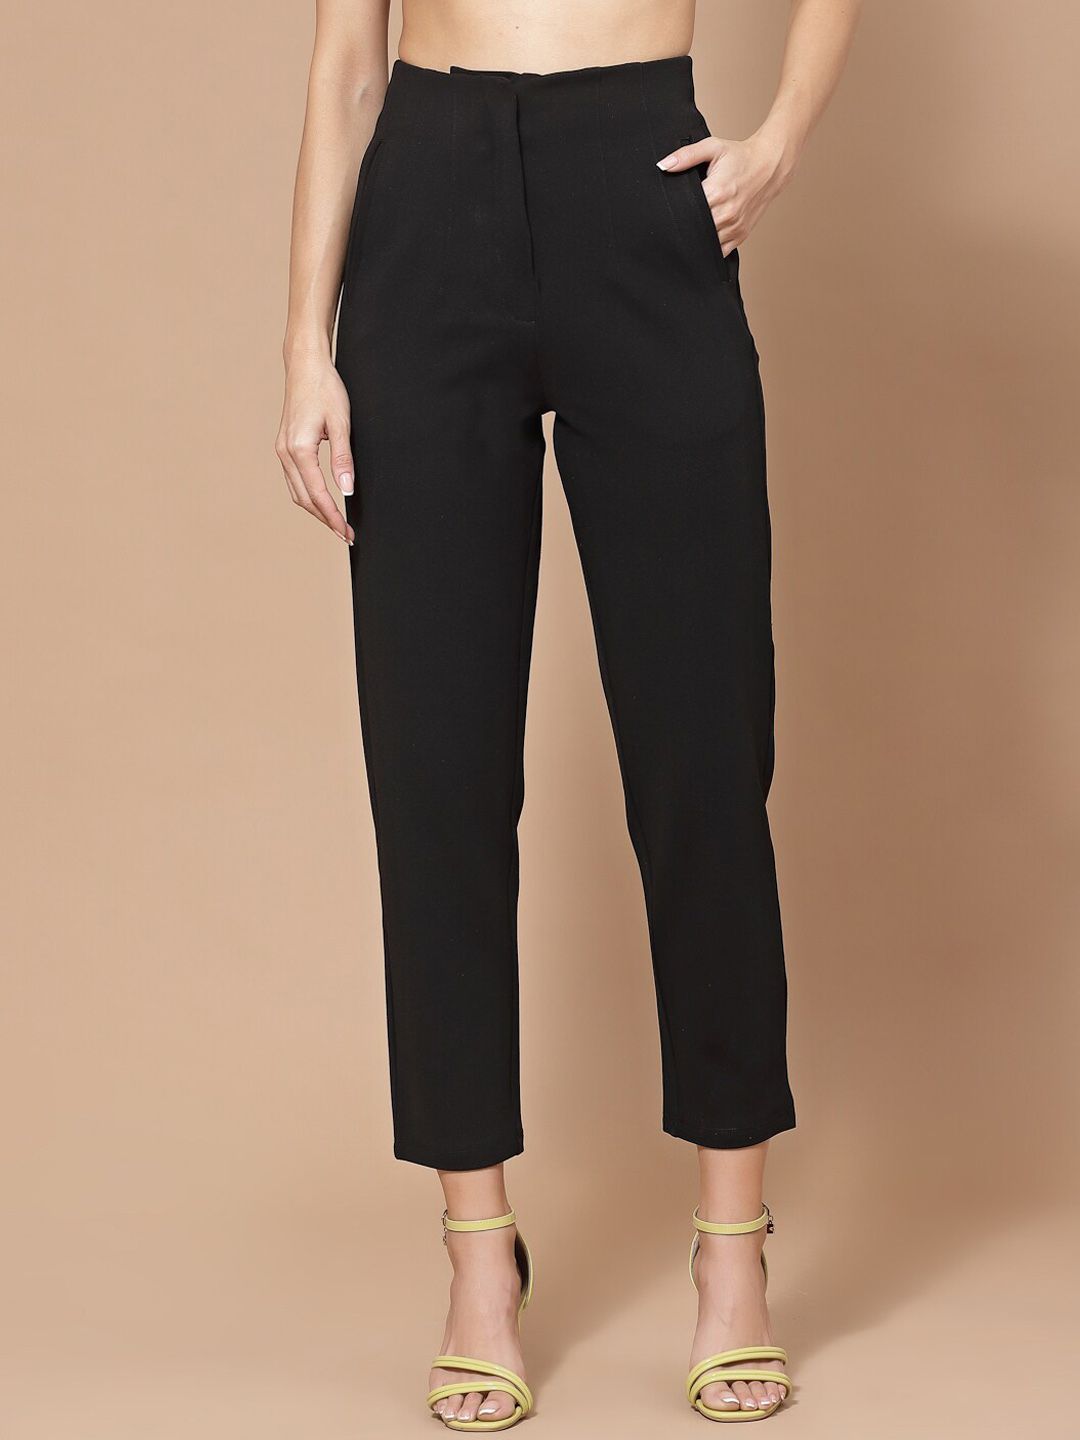 KASSUALLY Women Black Pleated Trousers Price in India